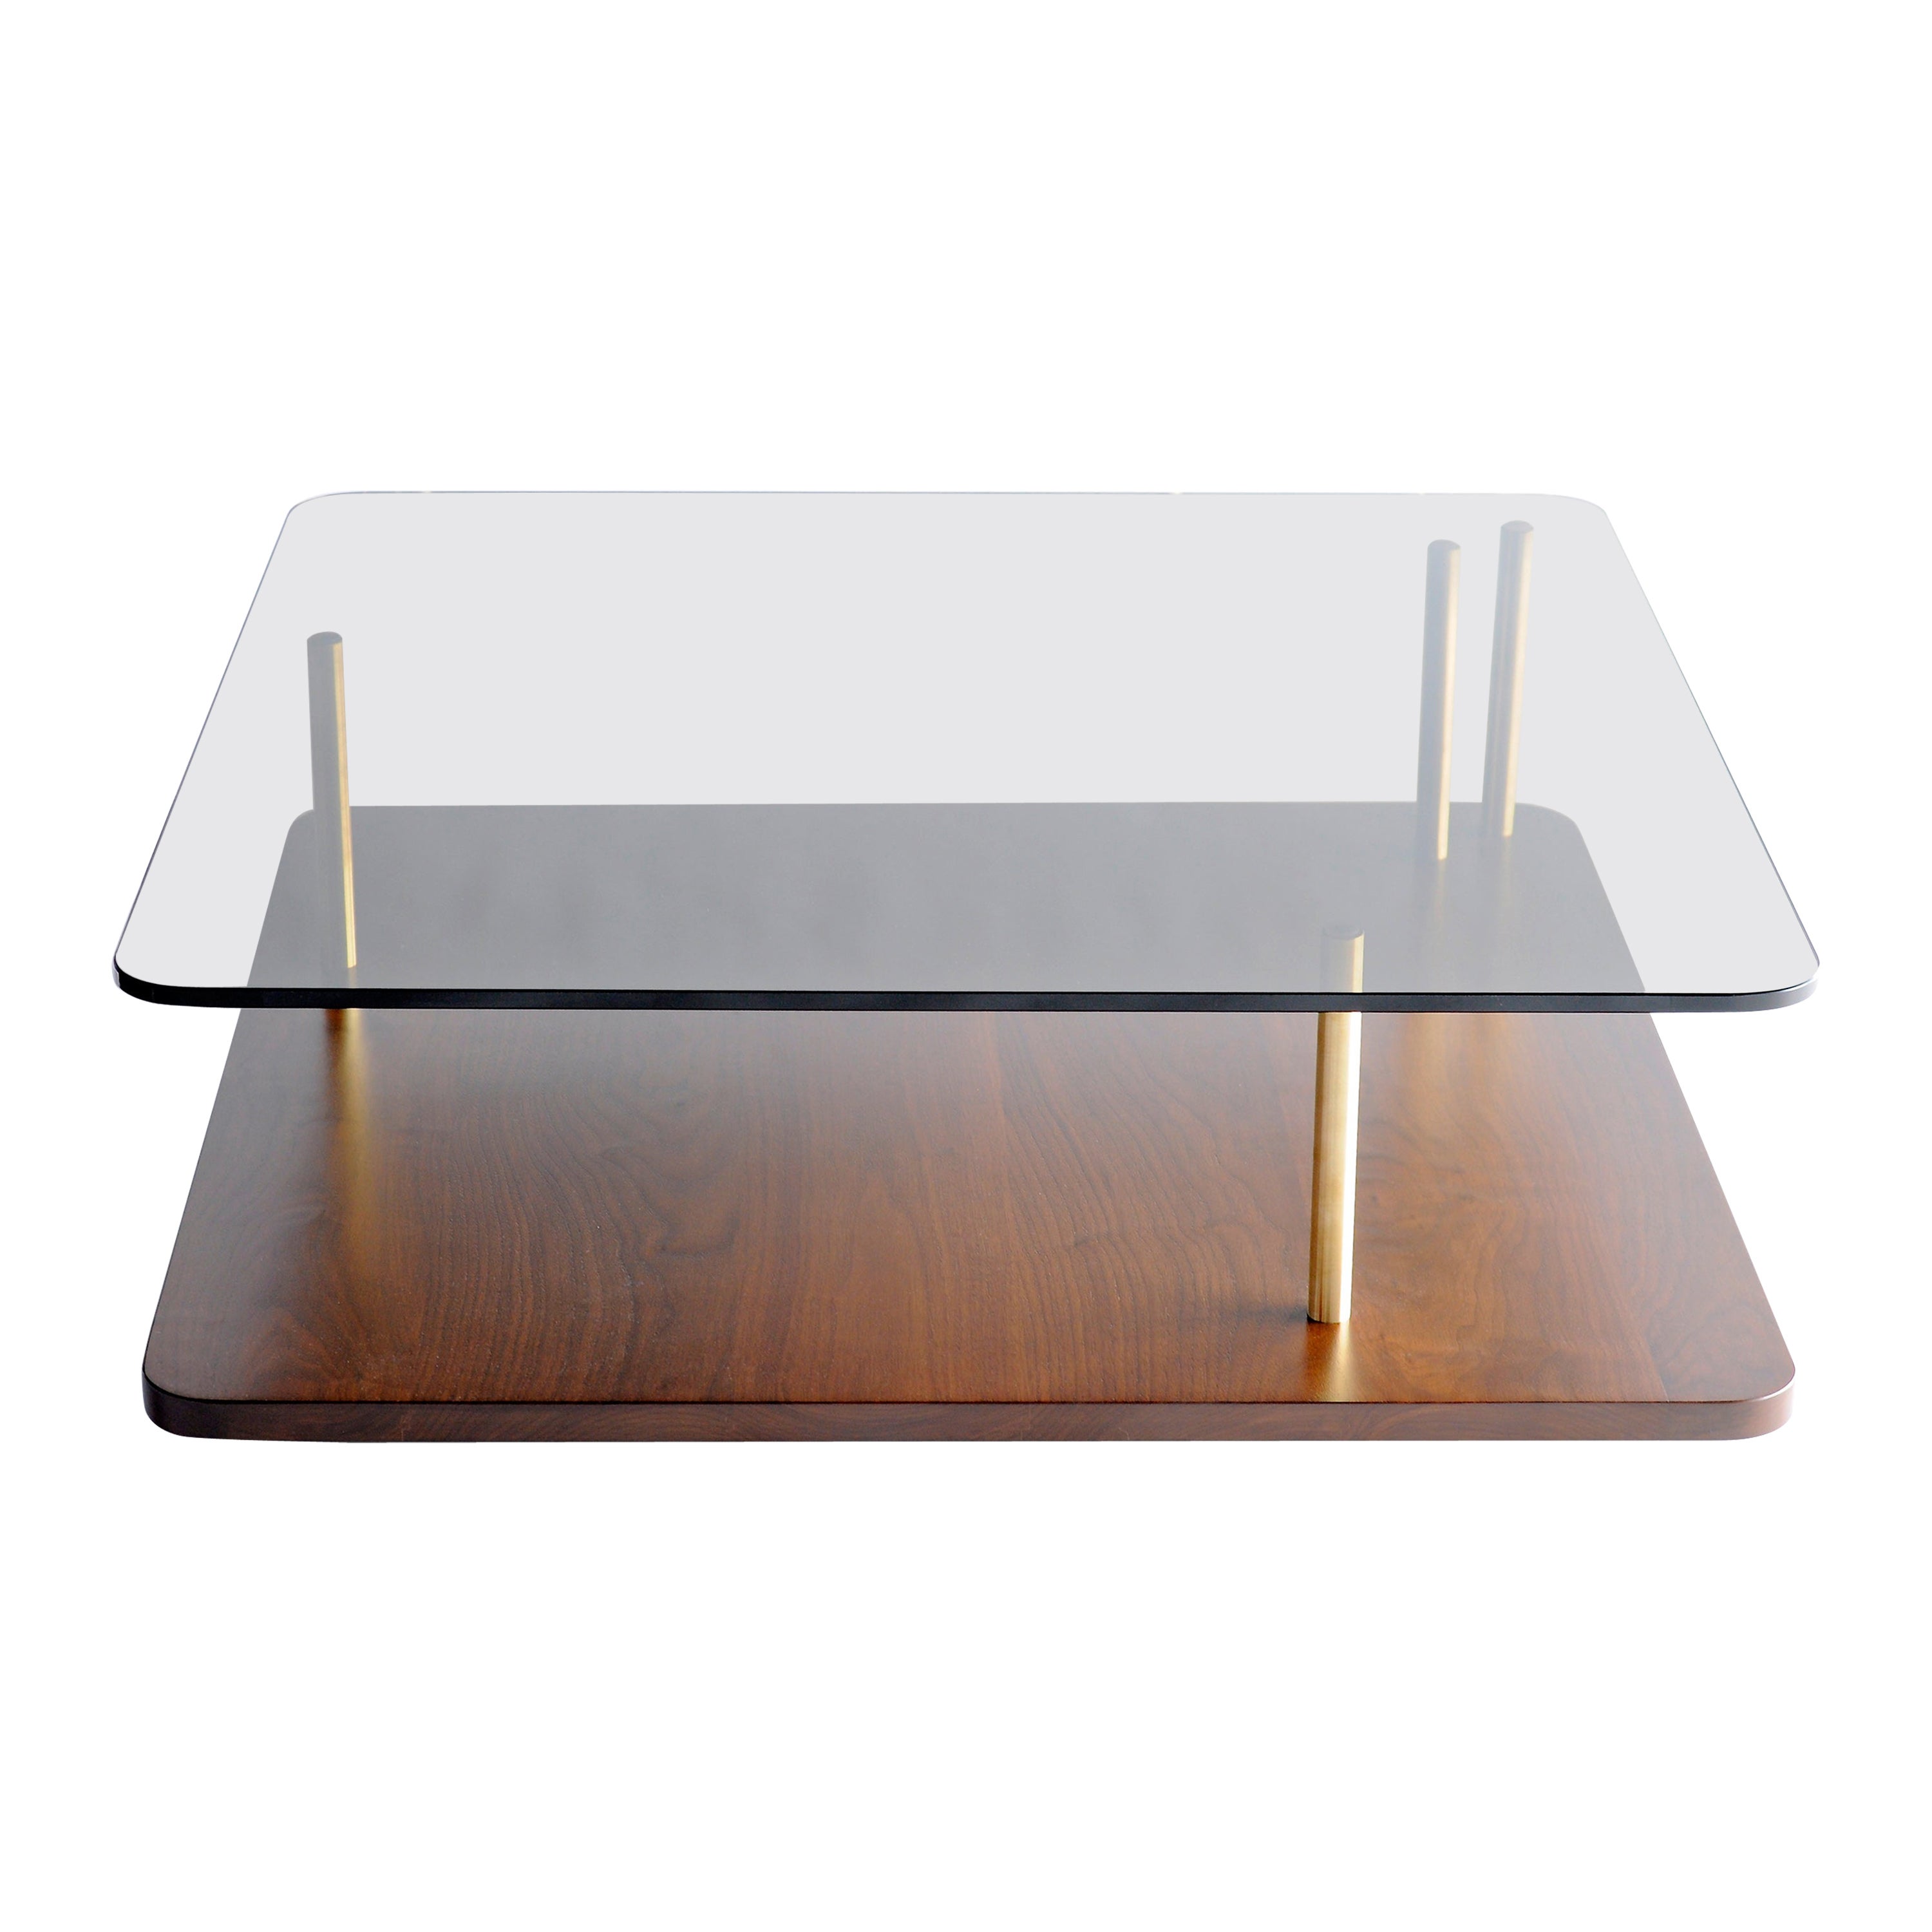 Points of Interest Square Coffee Table by Phase Design